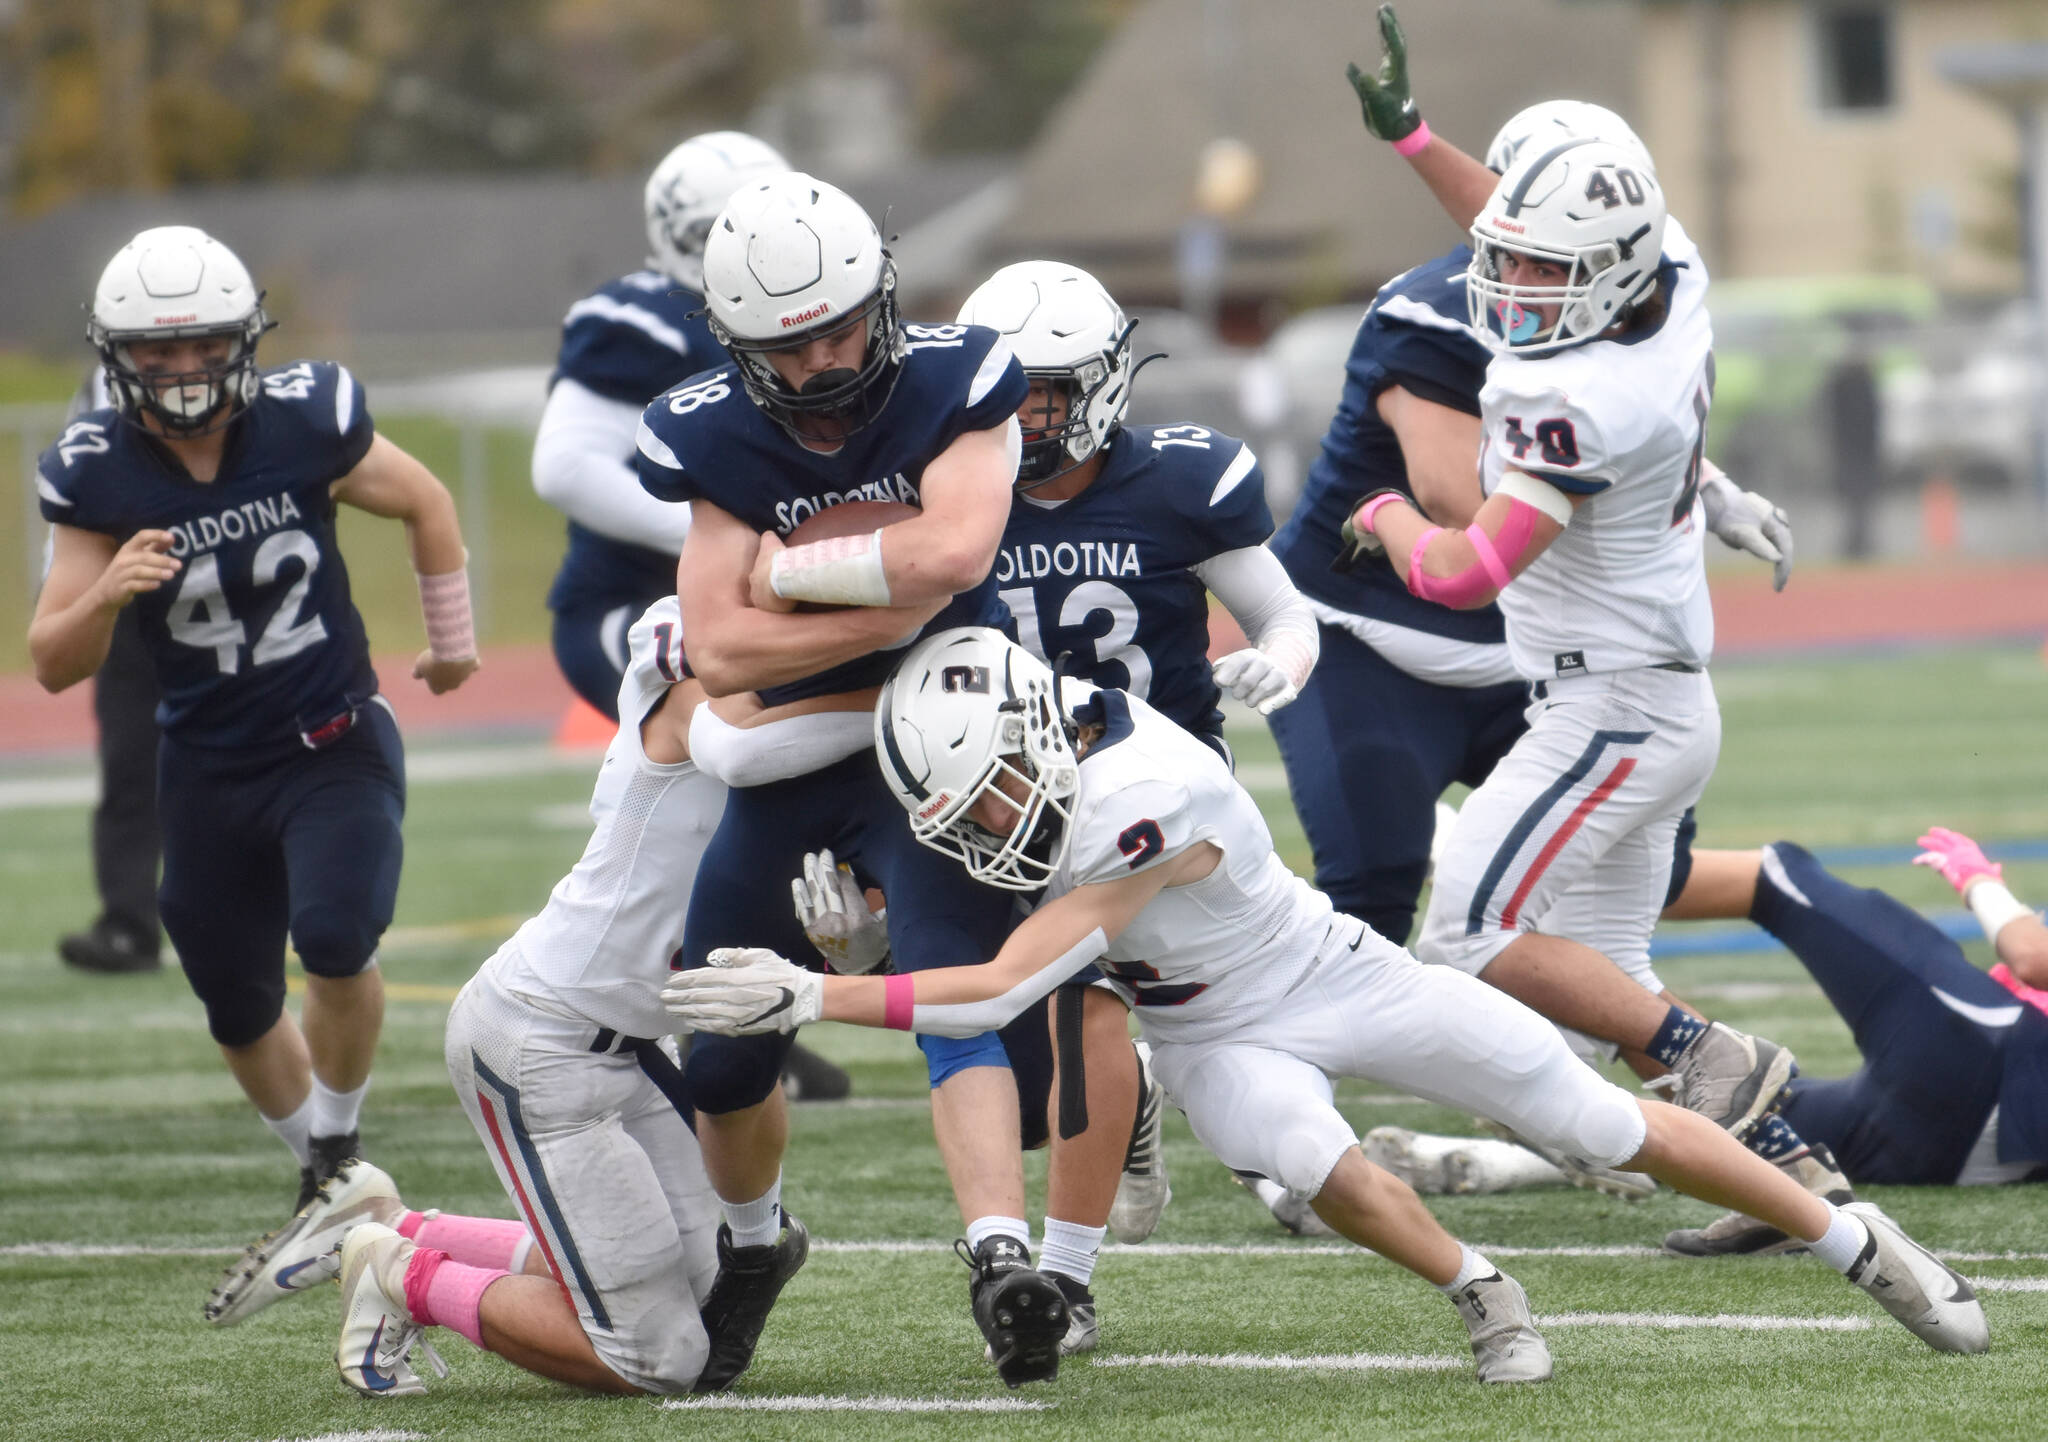 Soldotna’s Collin Peck is tackled by North Pole’s Logan Fischer and Trevor Walters on Friday, Oct. 7, 2022, at Justin Maile Field at Soldotna High School in Soldotna, Alaska. (Photo by Jeff Helminiak/Peninsula Clarion)